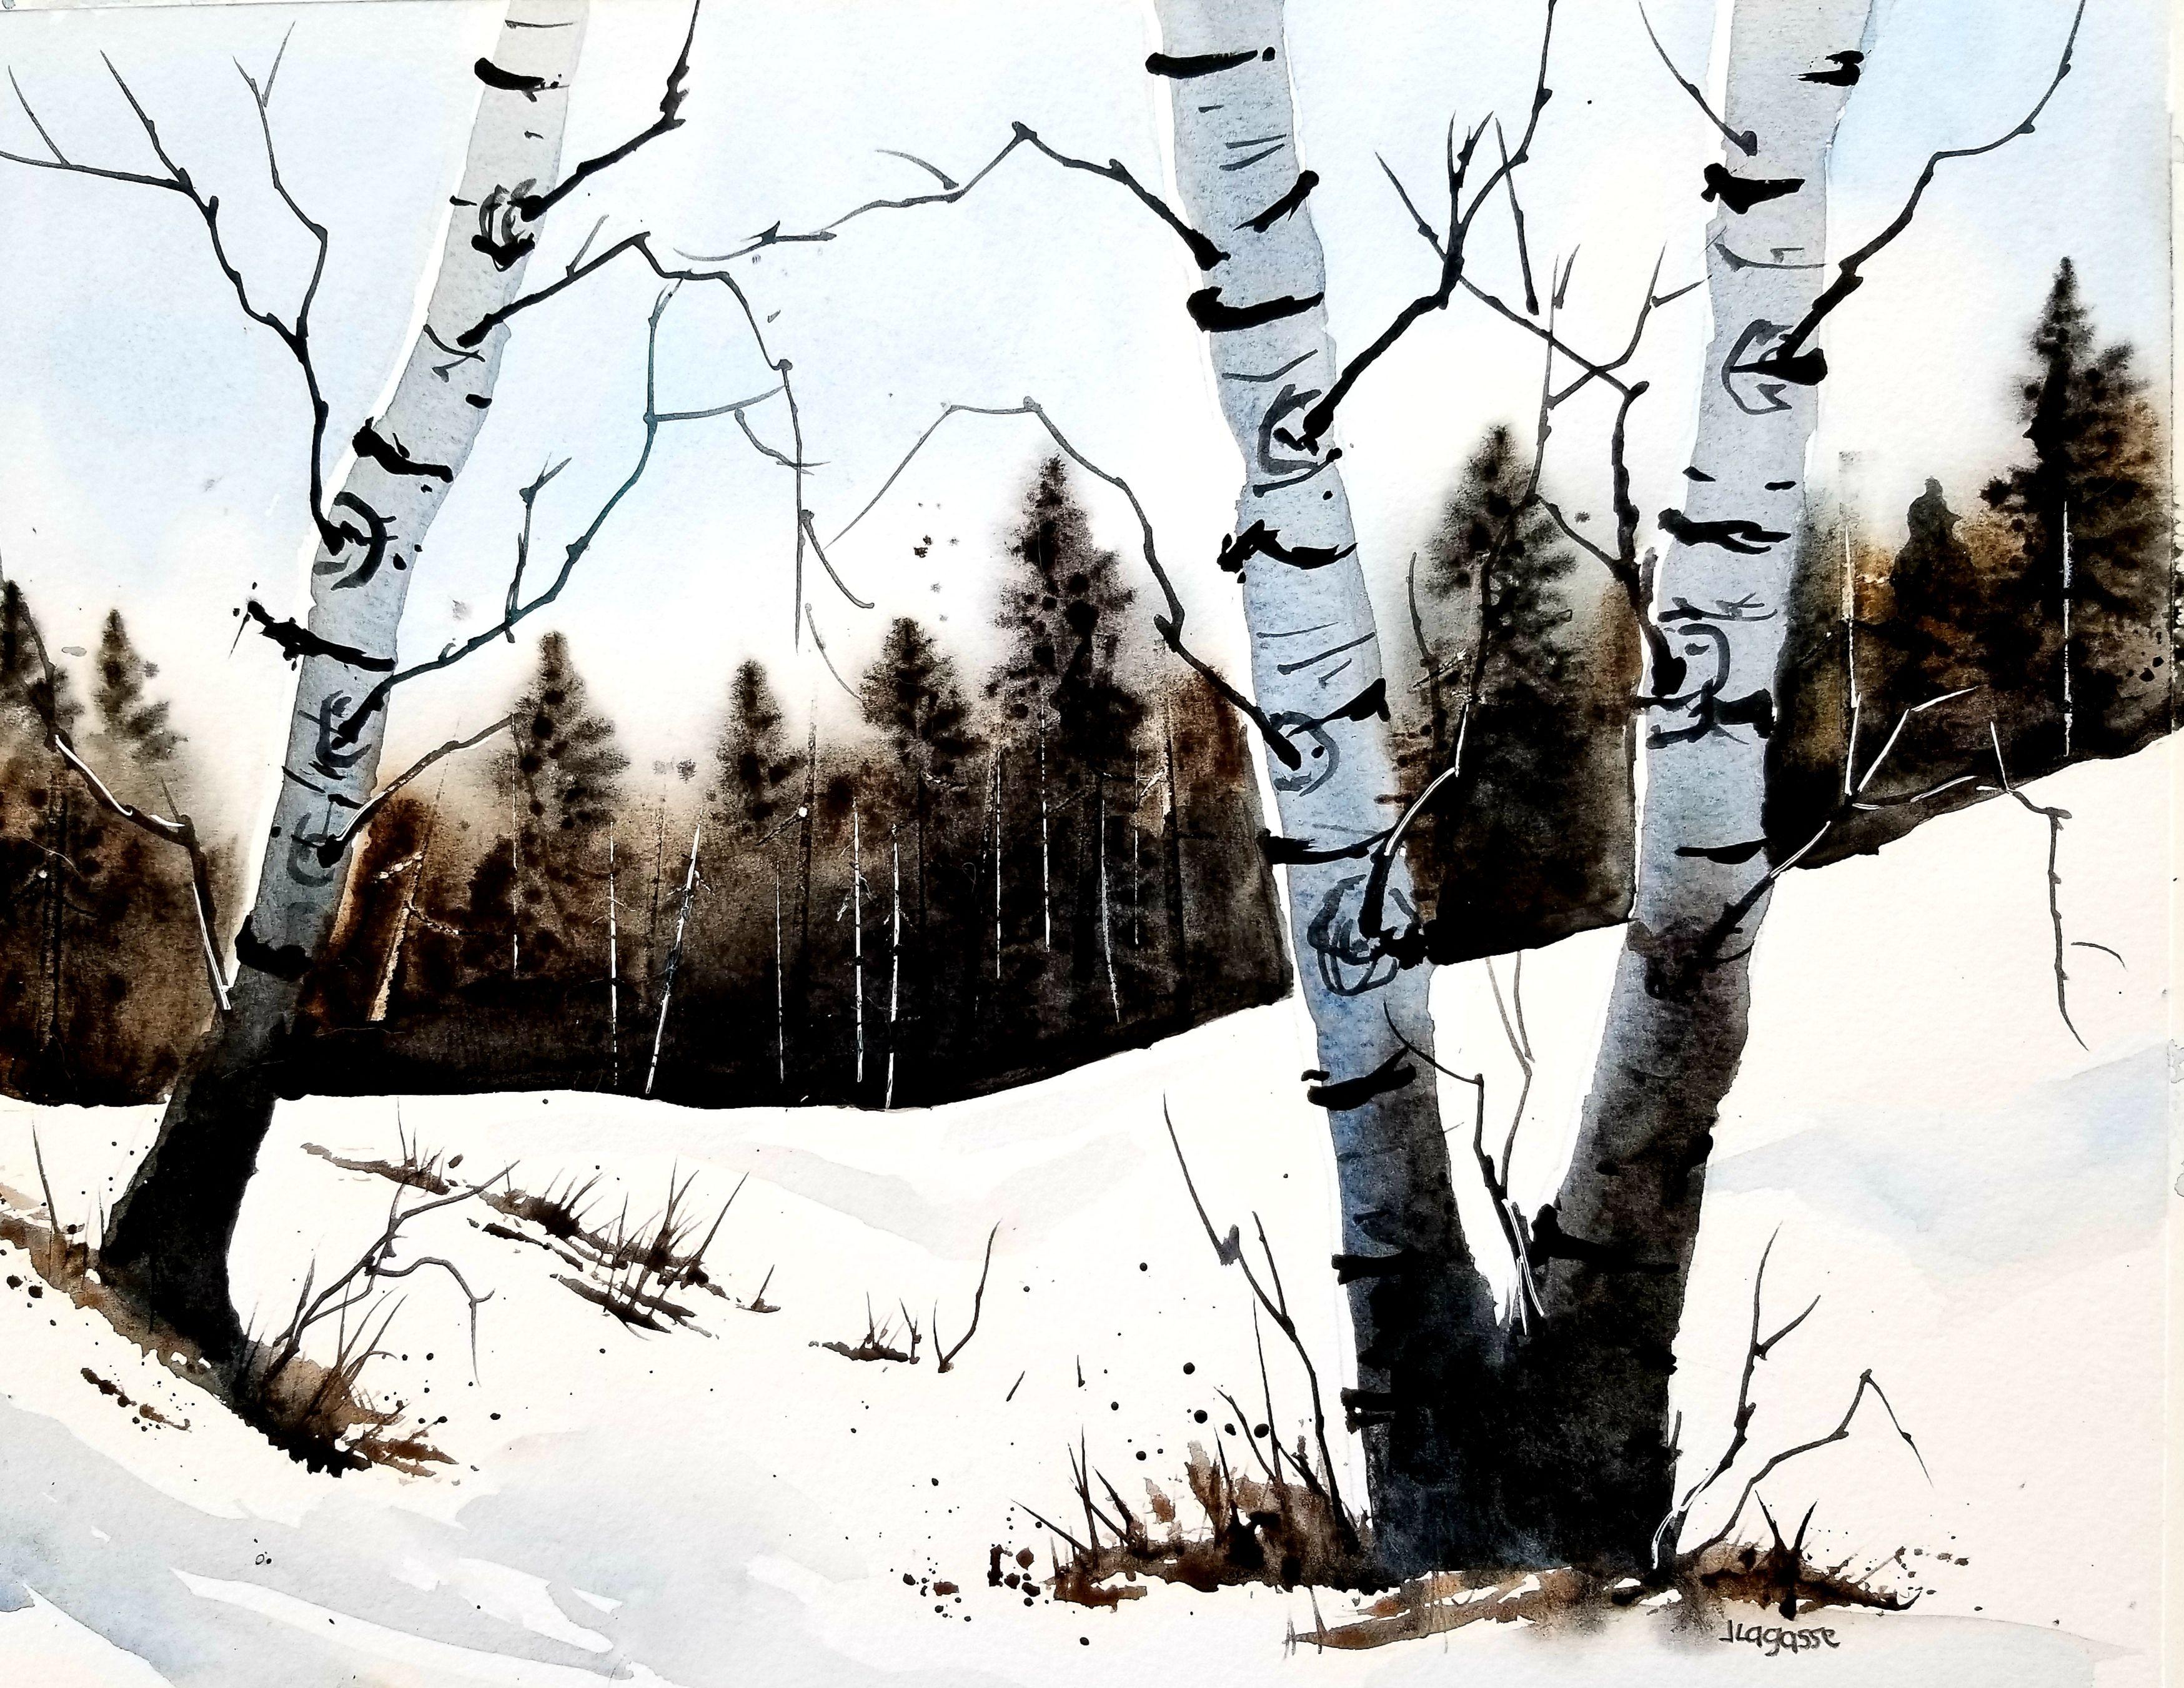 Birch Trees, Painting, Watercolor on Watercolor Paper - Art by Jim Lagasse